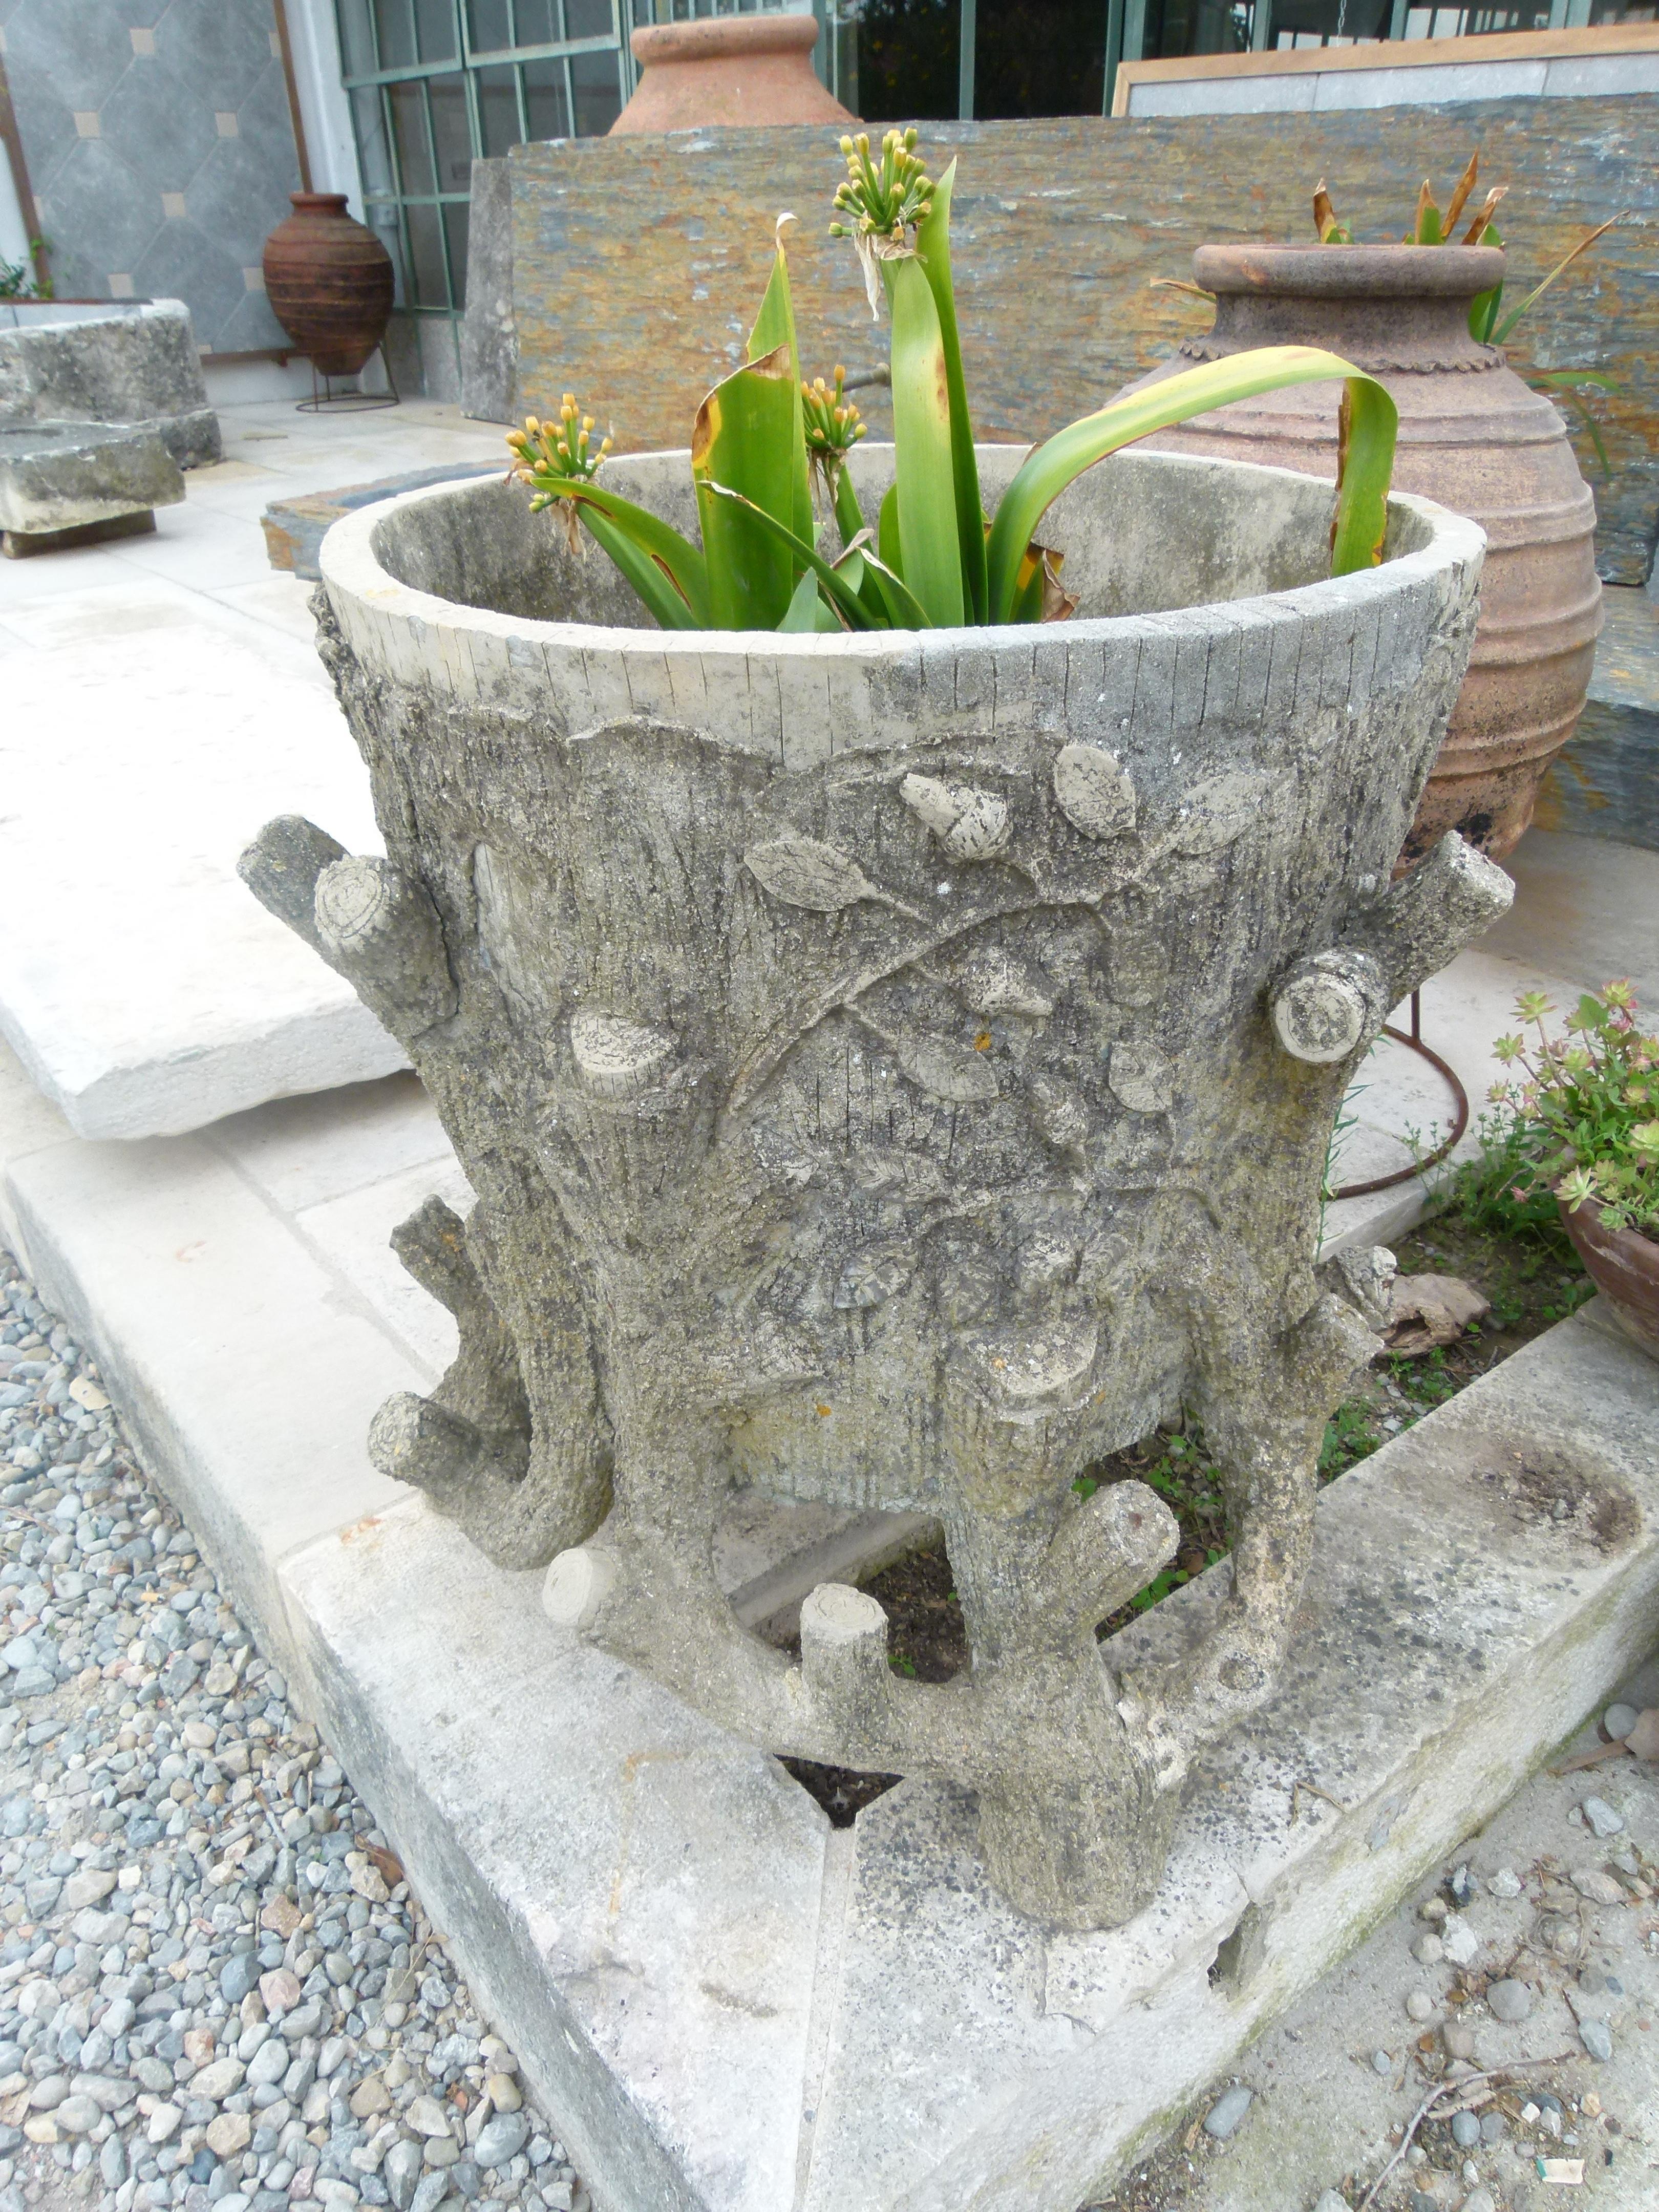 This French plant pot, made in the 1970s, is made of carved cement. Botanic ornaments as a tree's trunk, some leaves, or roots adorn the pot.
Nowadays, this type of decorative garden objects, made of cement or mortar are getting very popular and